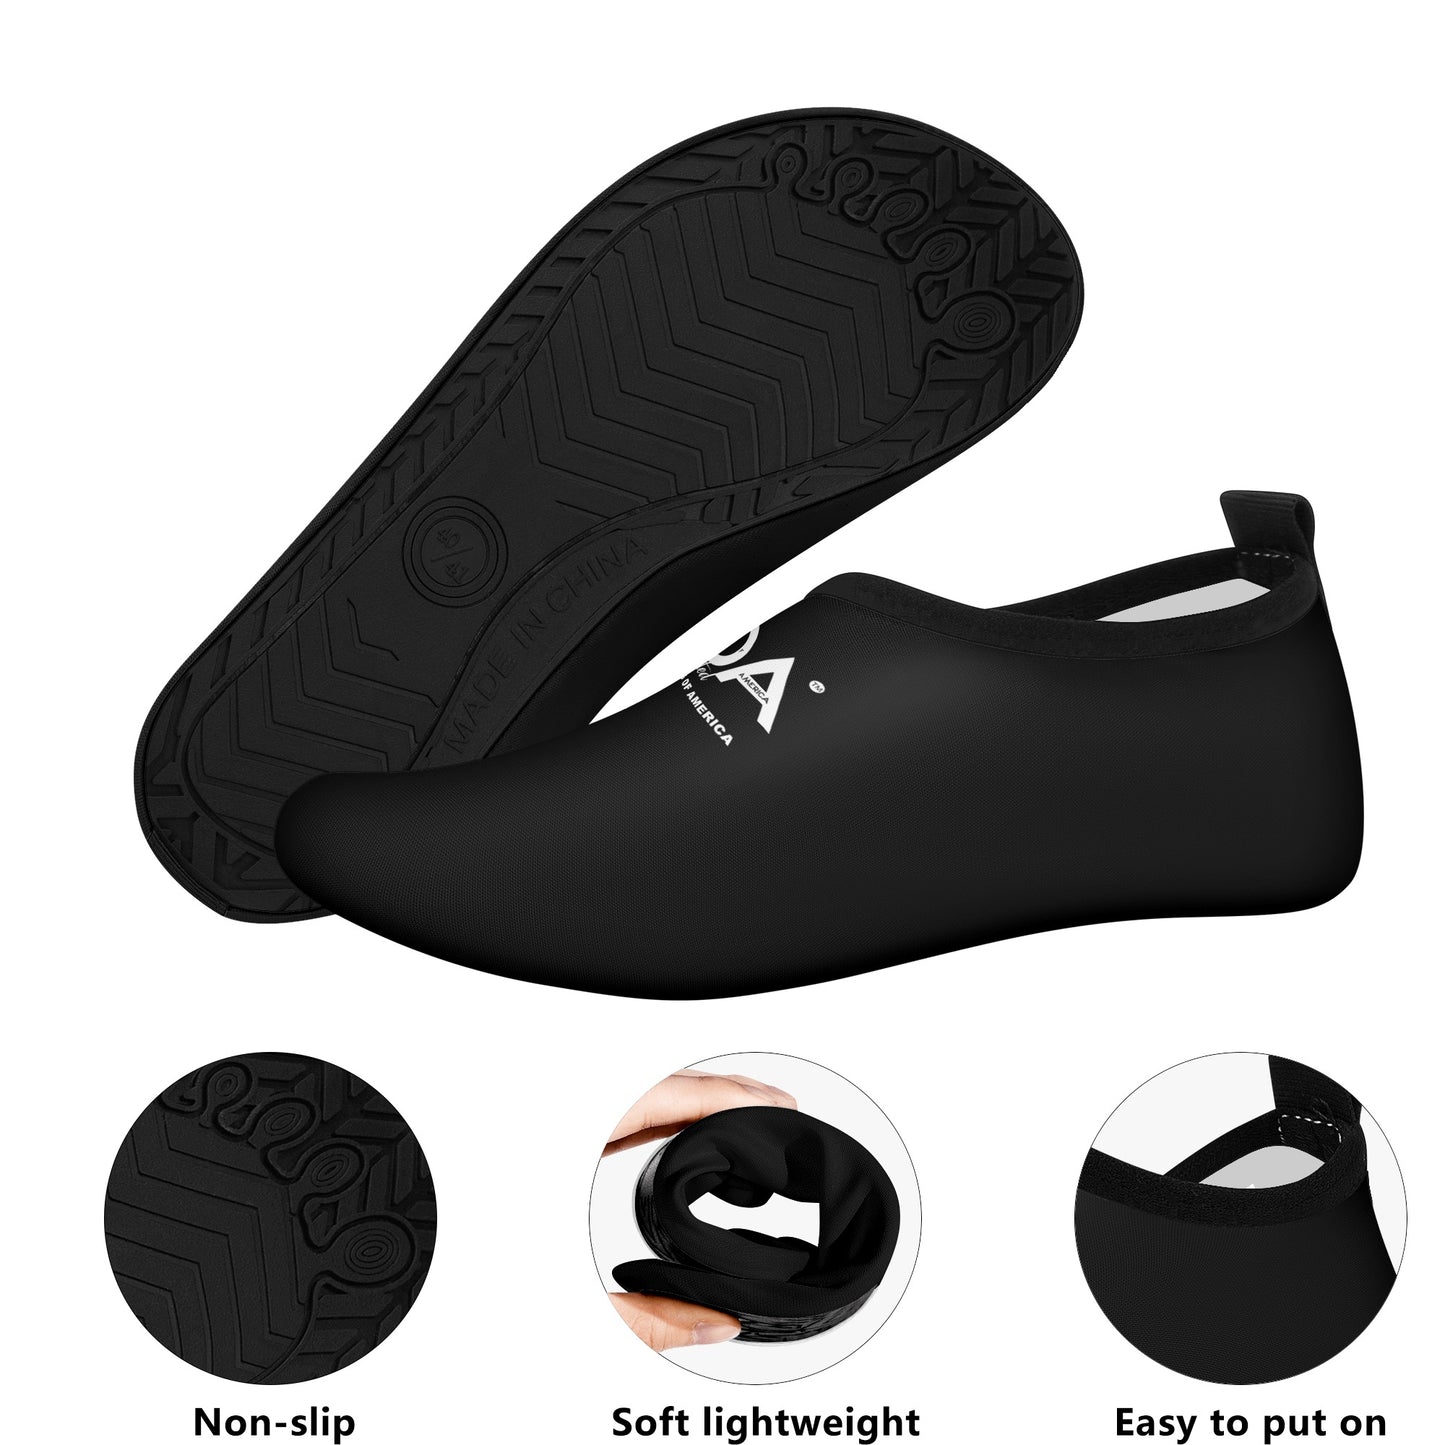 Mens Water Sports Skin Shoes